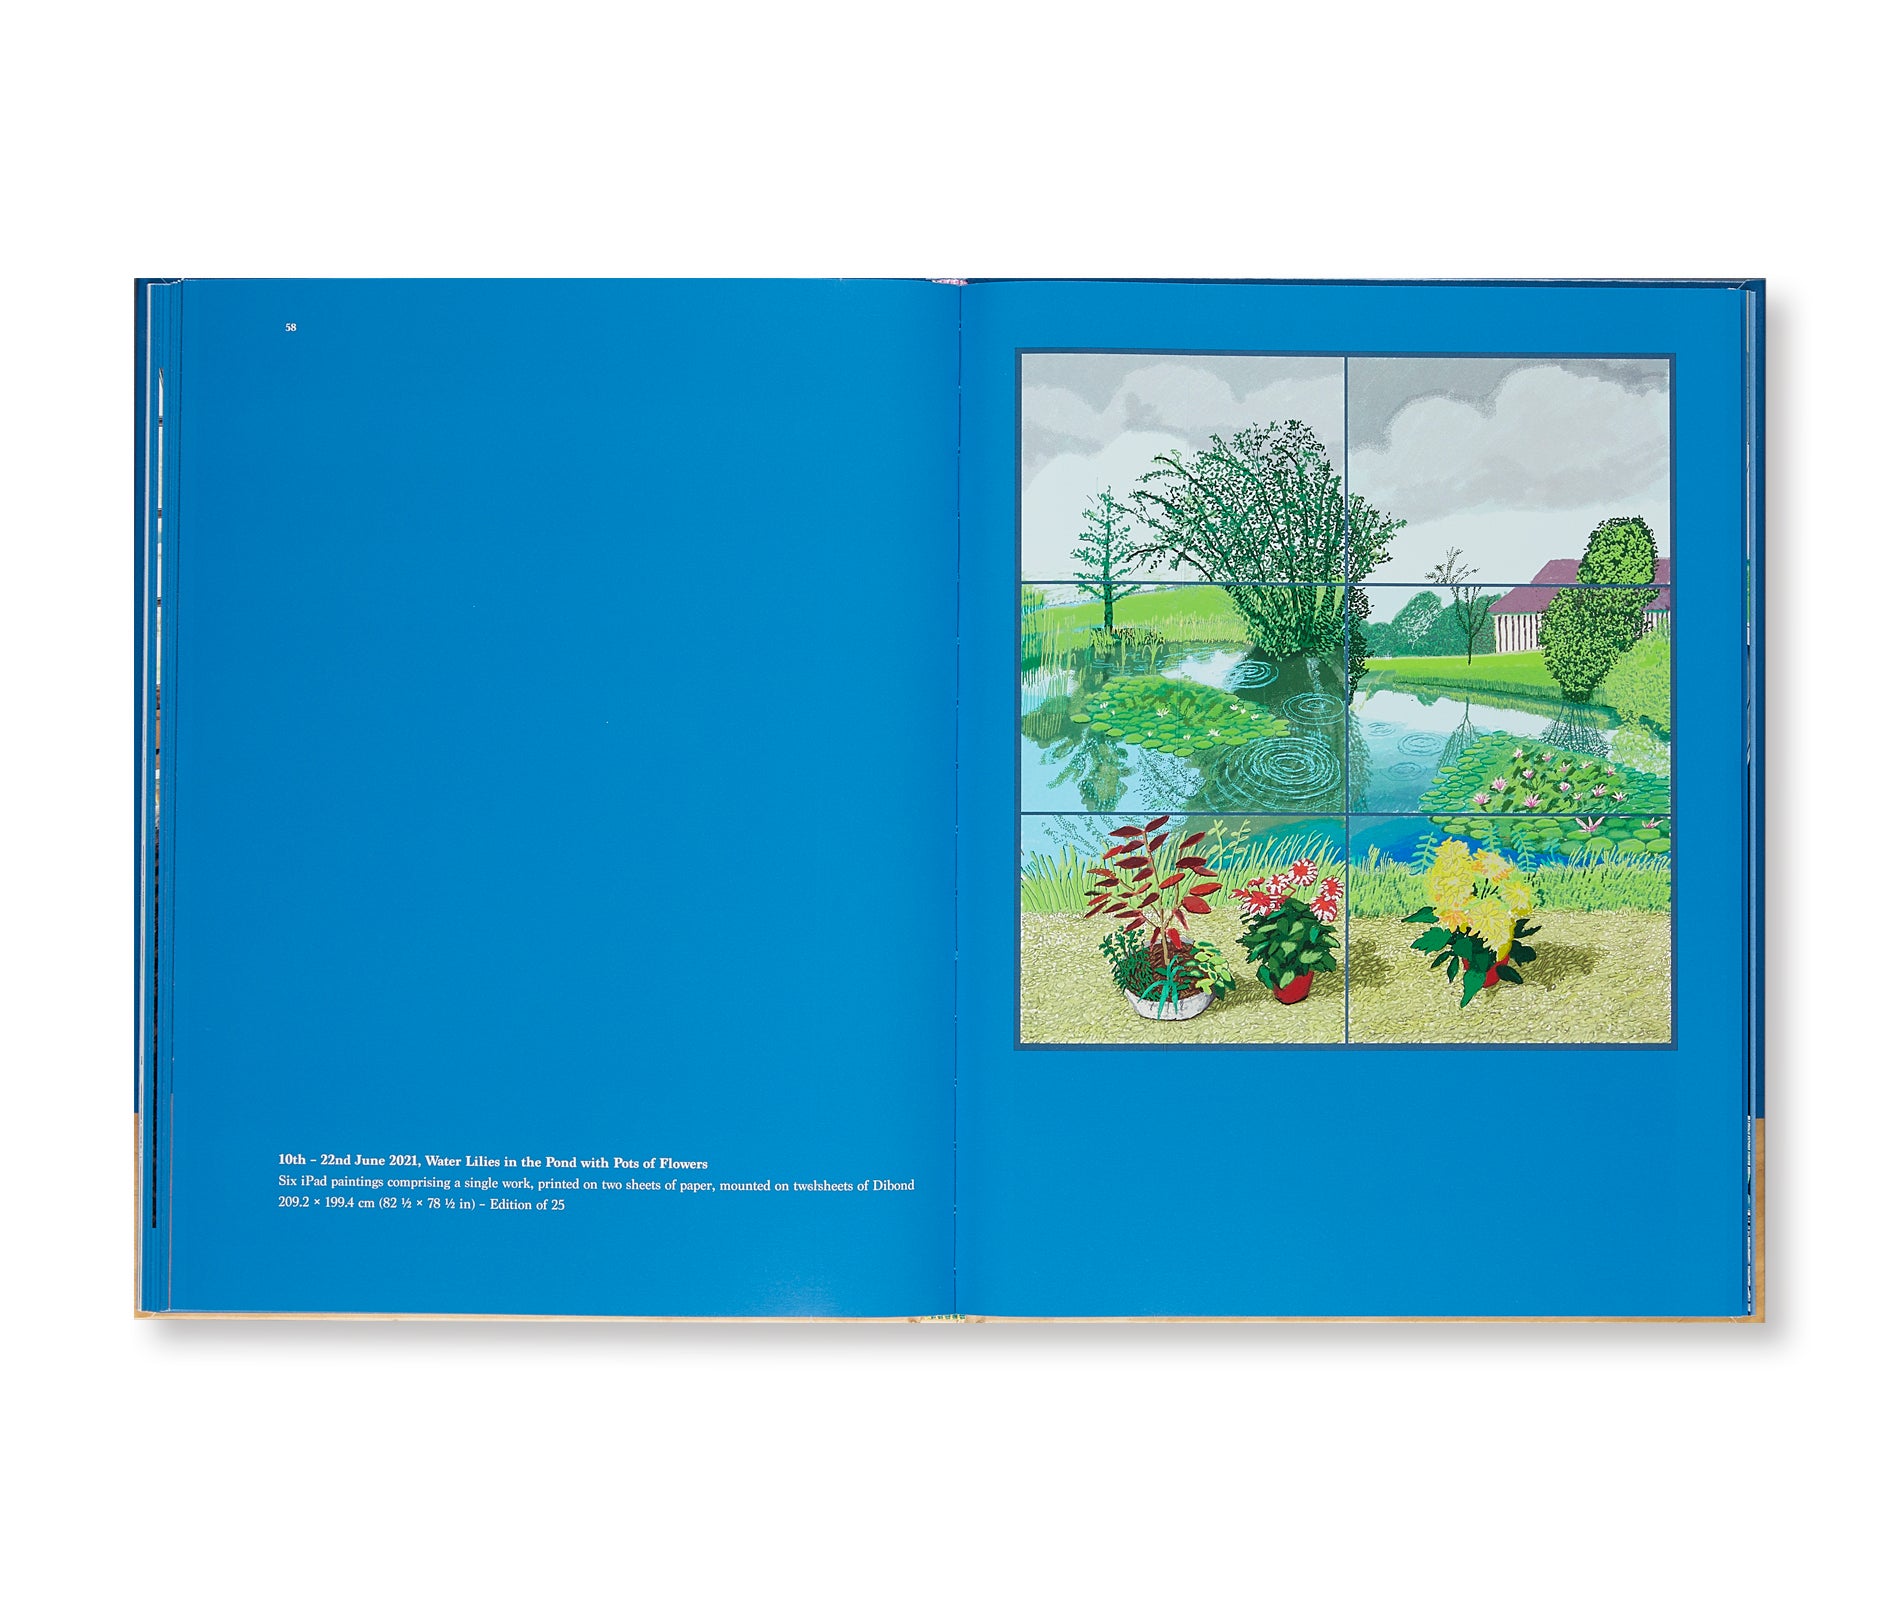 20 FLOWERS AND SOME BIGGER PICTURES by David Hockney